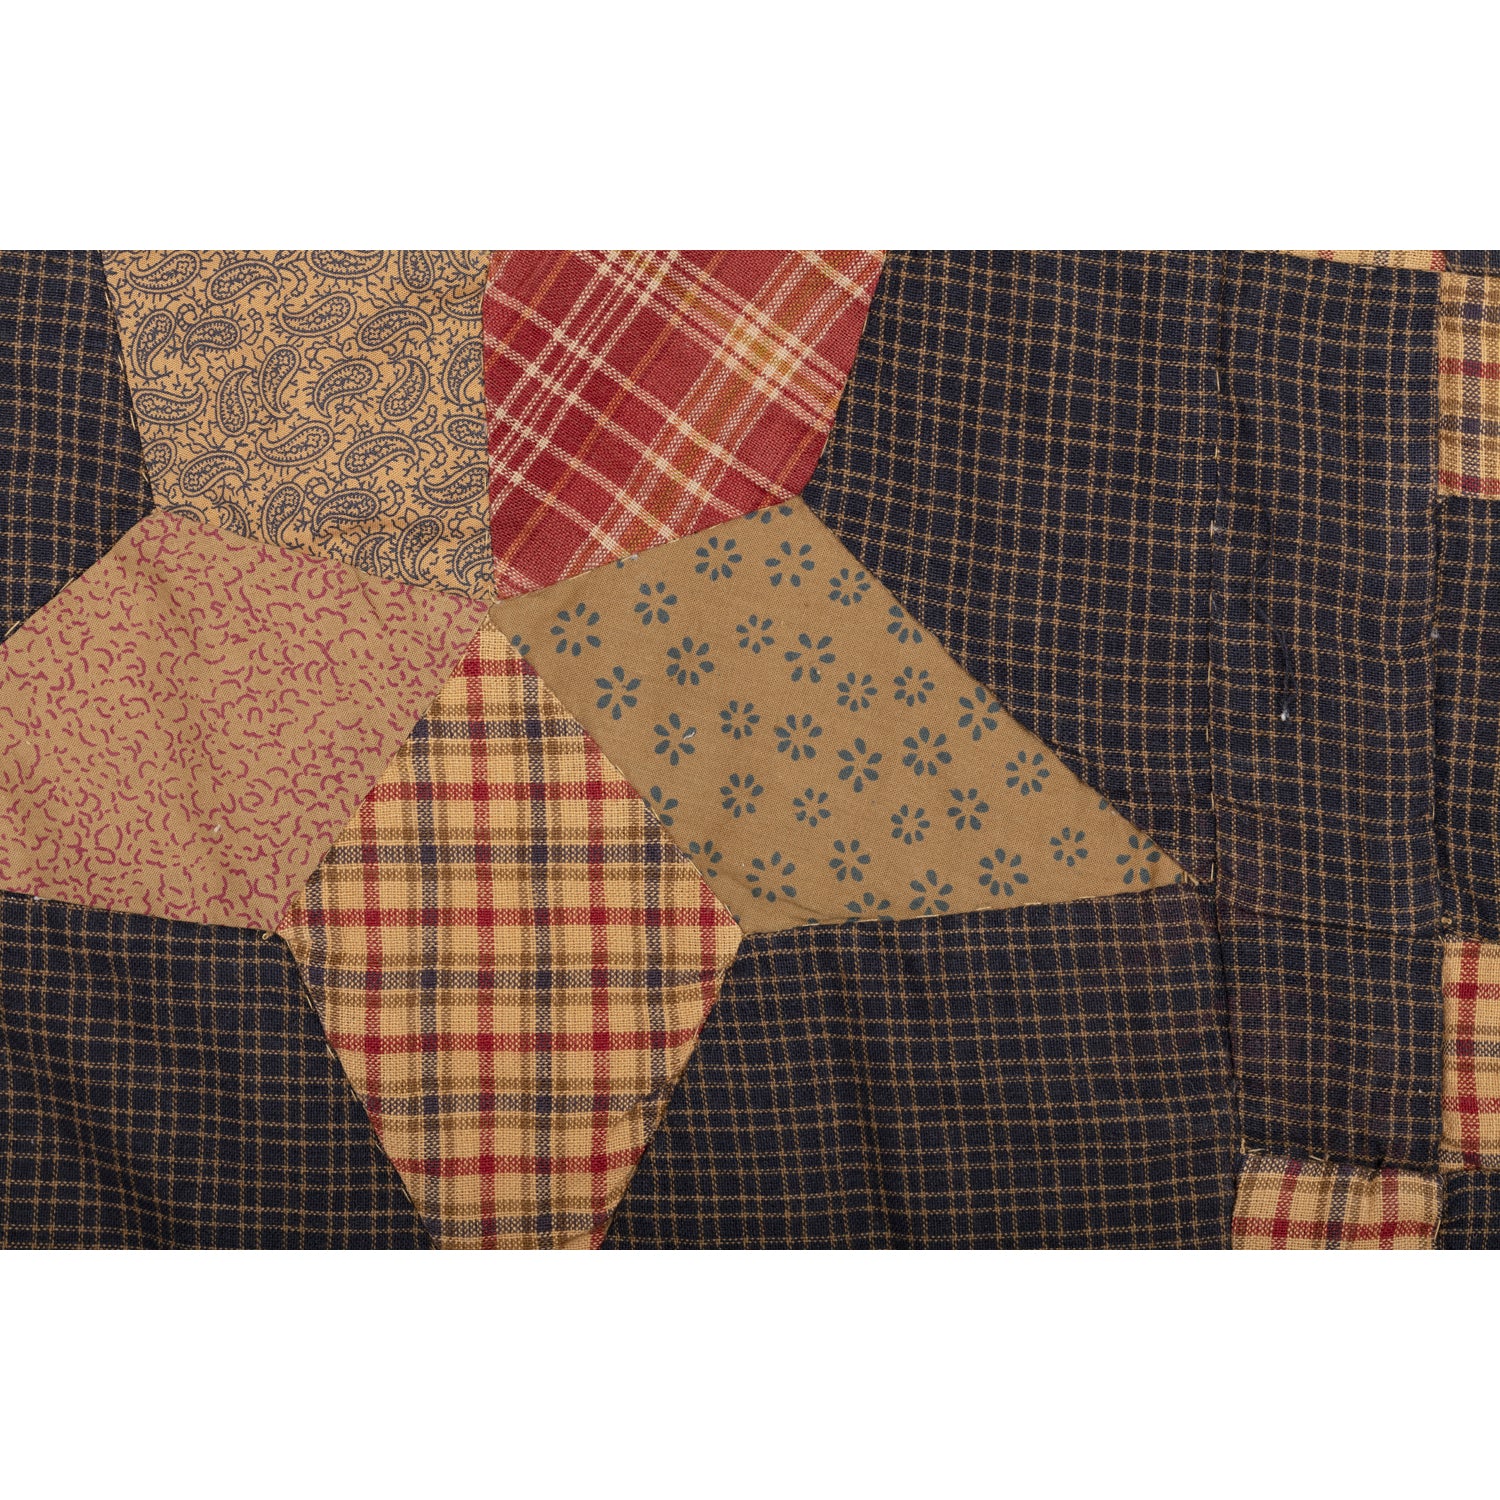 12274-Arlington-Runner-Quilted-Patchwork-Star-13x36-image-6